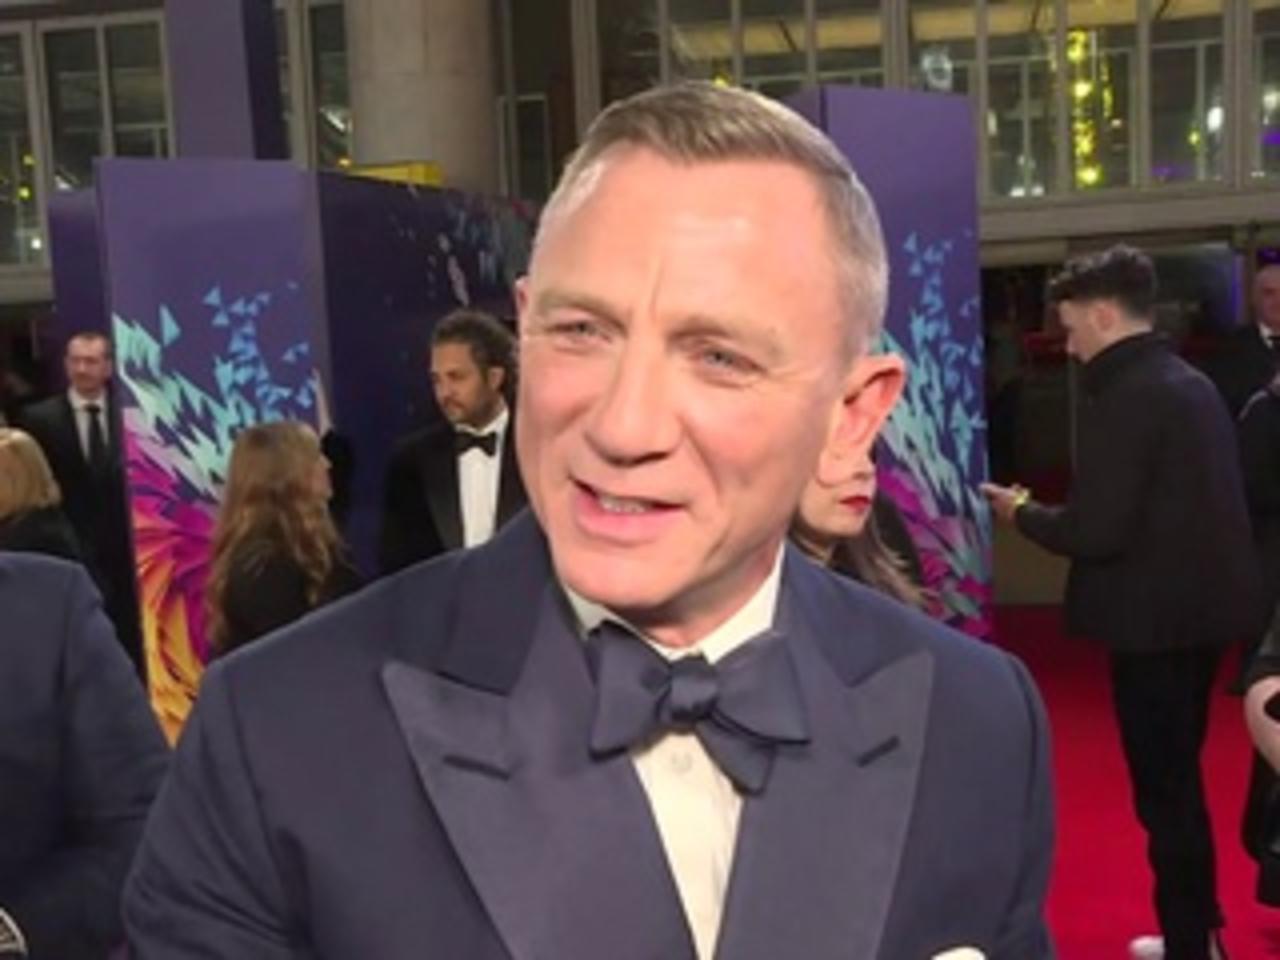 'HATE all of them!': Daniel Craig on his former Knives Out co-stars...